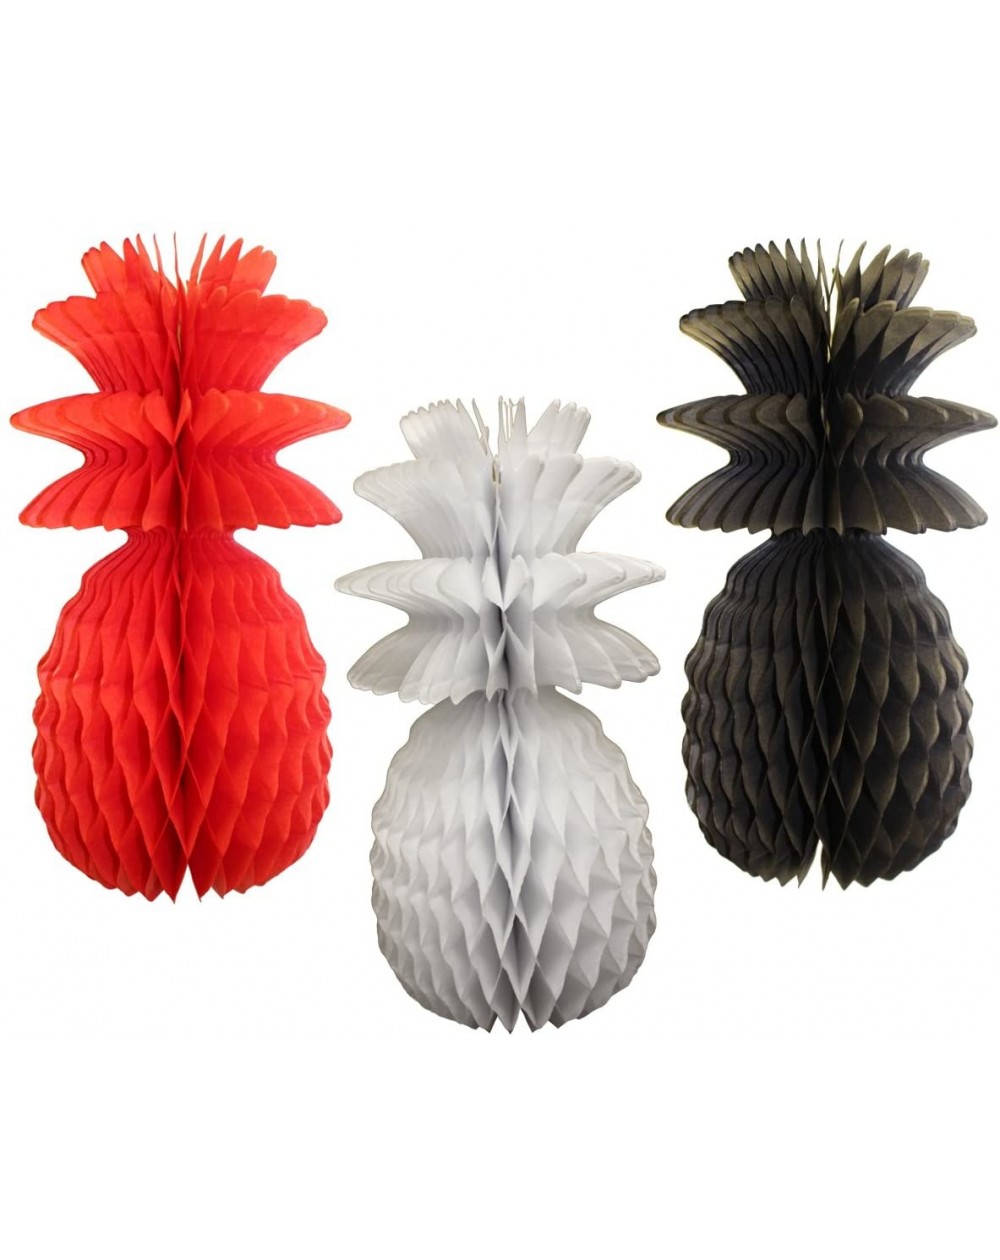 Centerpieces Large Solid Colored 13 Inch Honeycomb Pineapple Party Decoration Kit (Caribbean - Red- White- Black) - Caribbean...